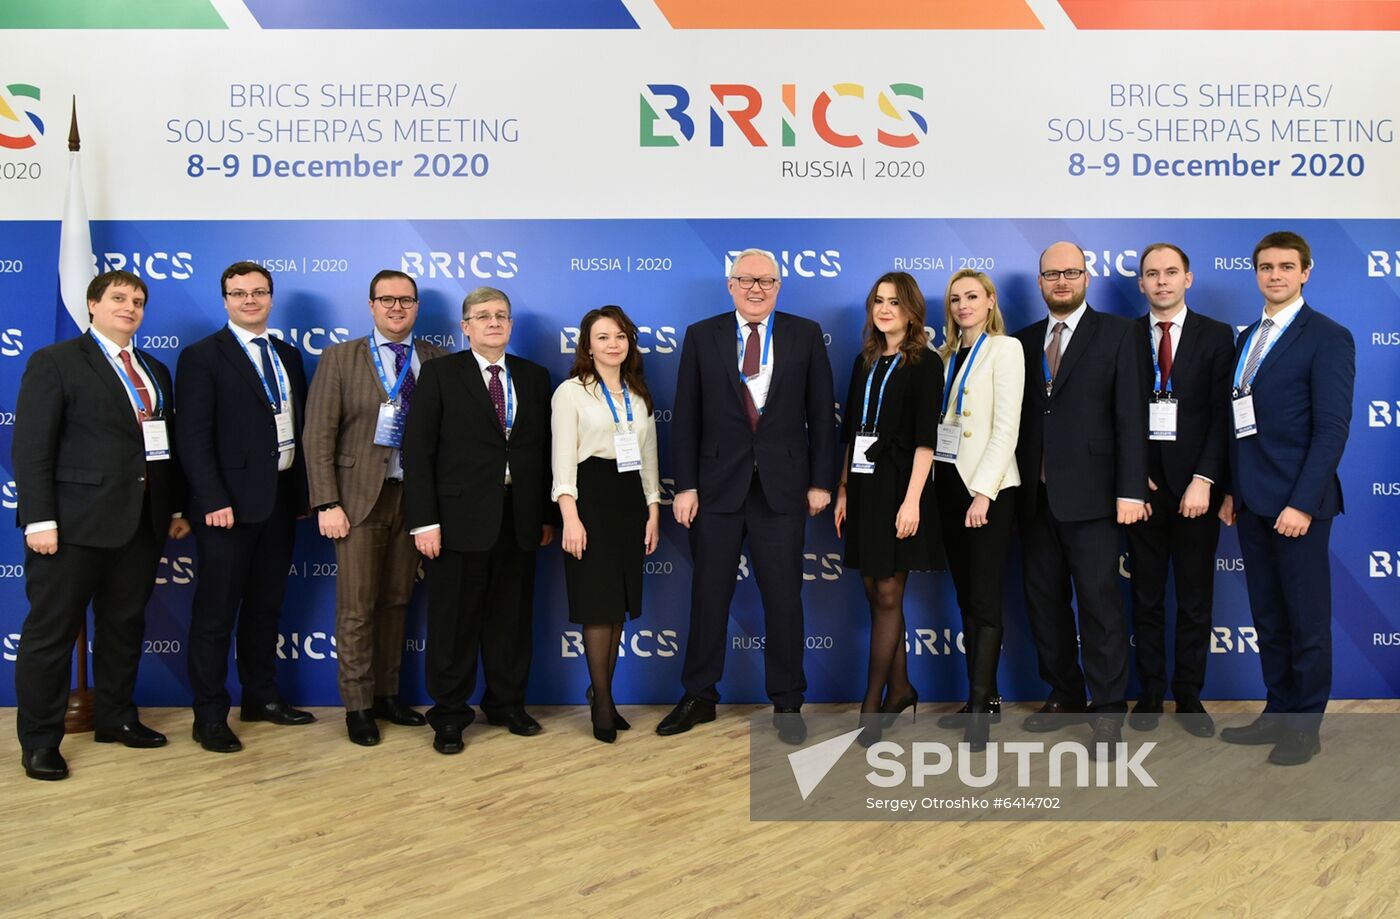 Meeting of BRICS Sherpas/Sous-Sherpas. Day two